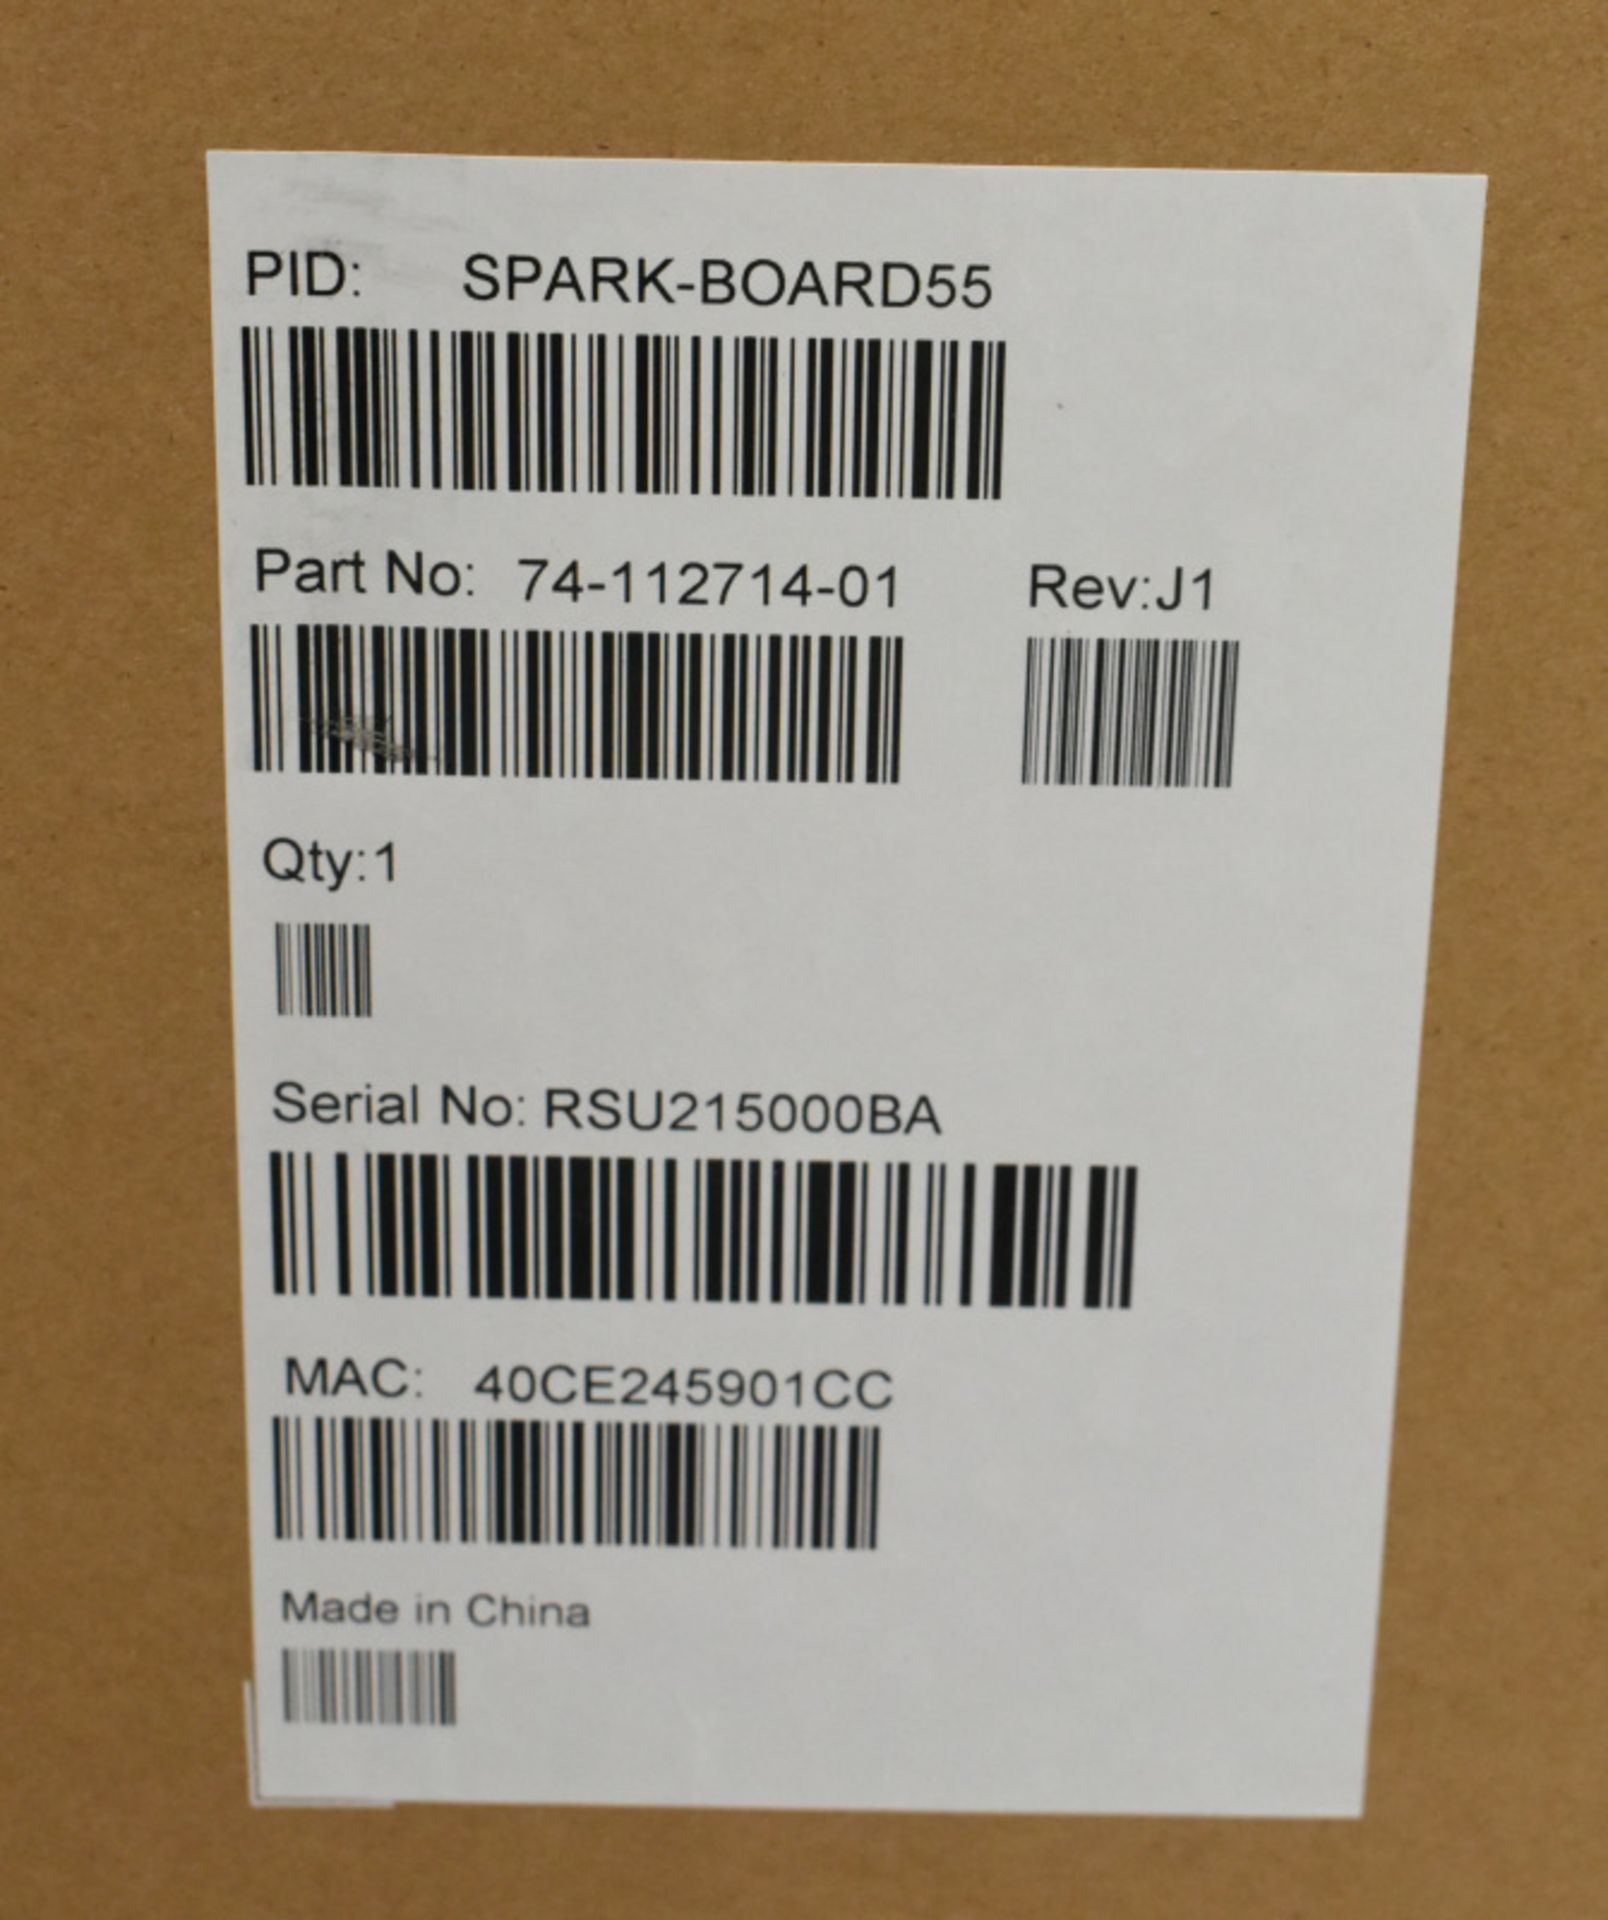 Brand New Cisco 74-112714-01 Spark-Board55 Video Conferencing Touch Screen - Image 13 of 14